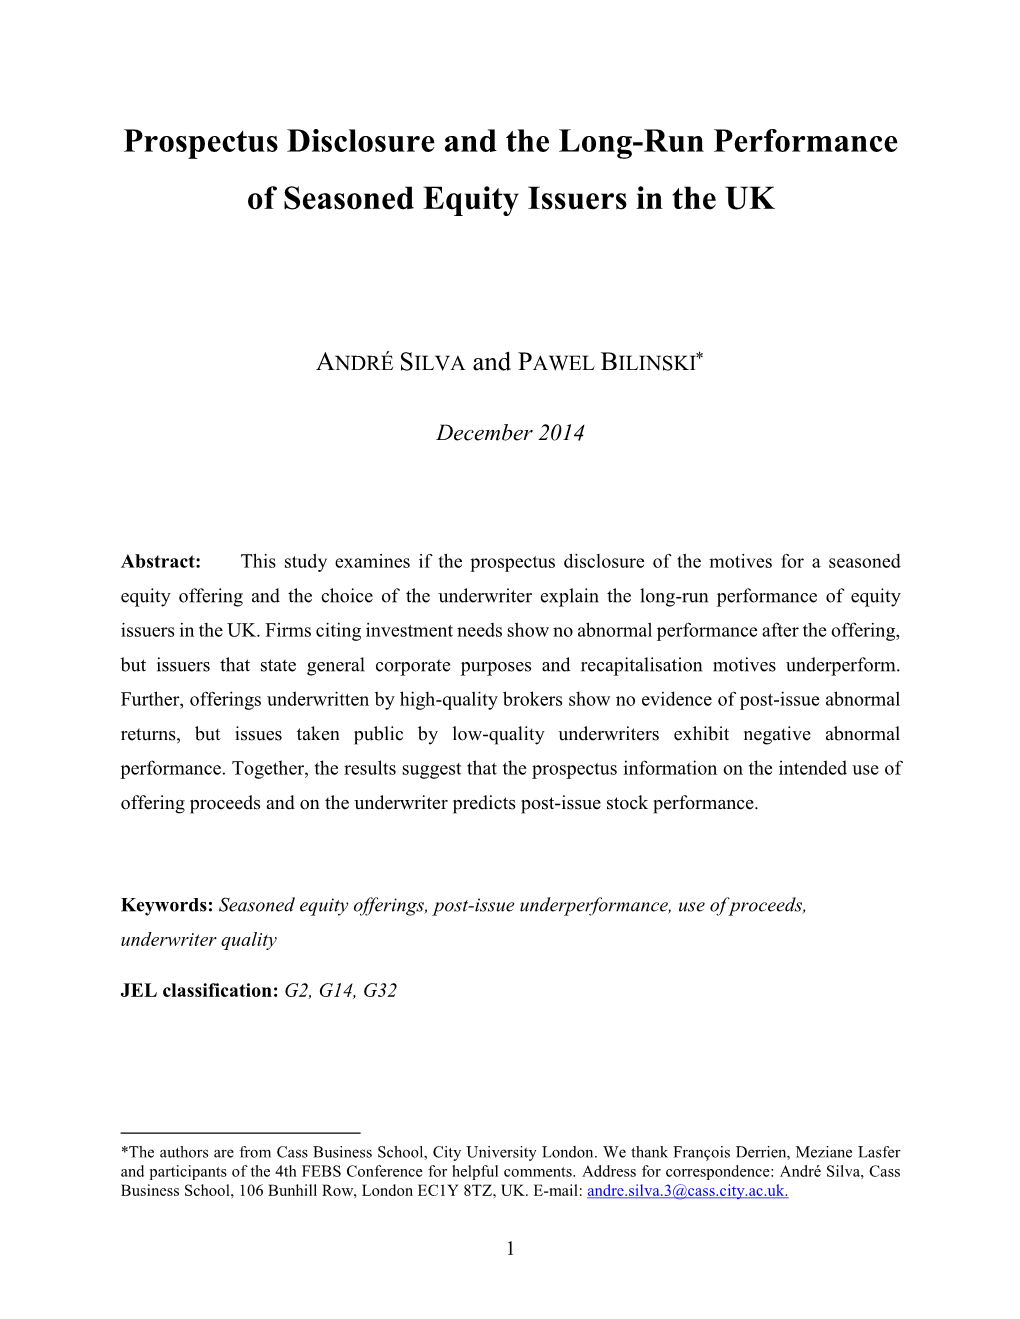 Prospectus Disclosure and the Long-Run Performance of Seasoned Equity Issuers in the UK